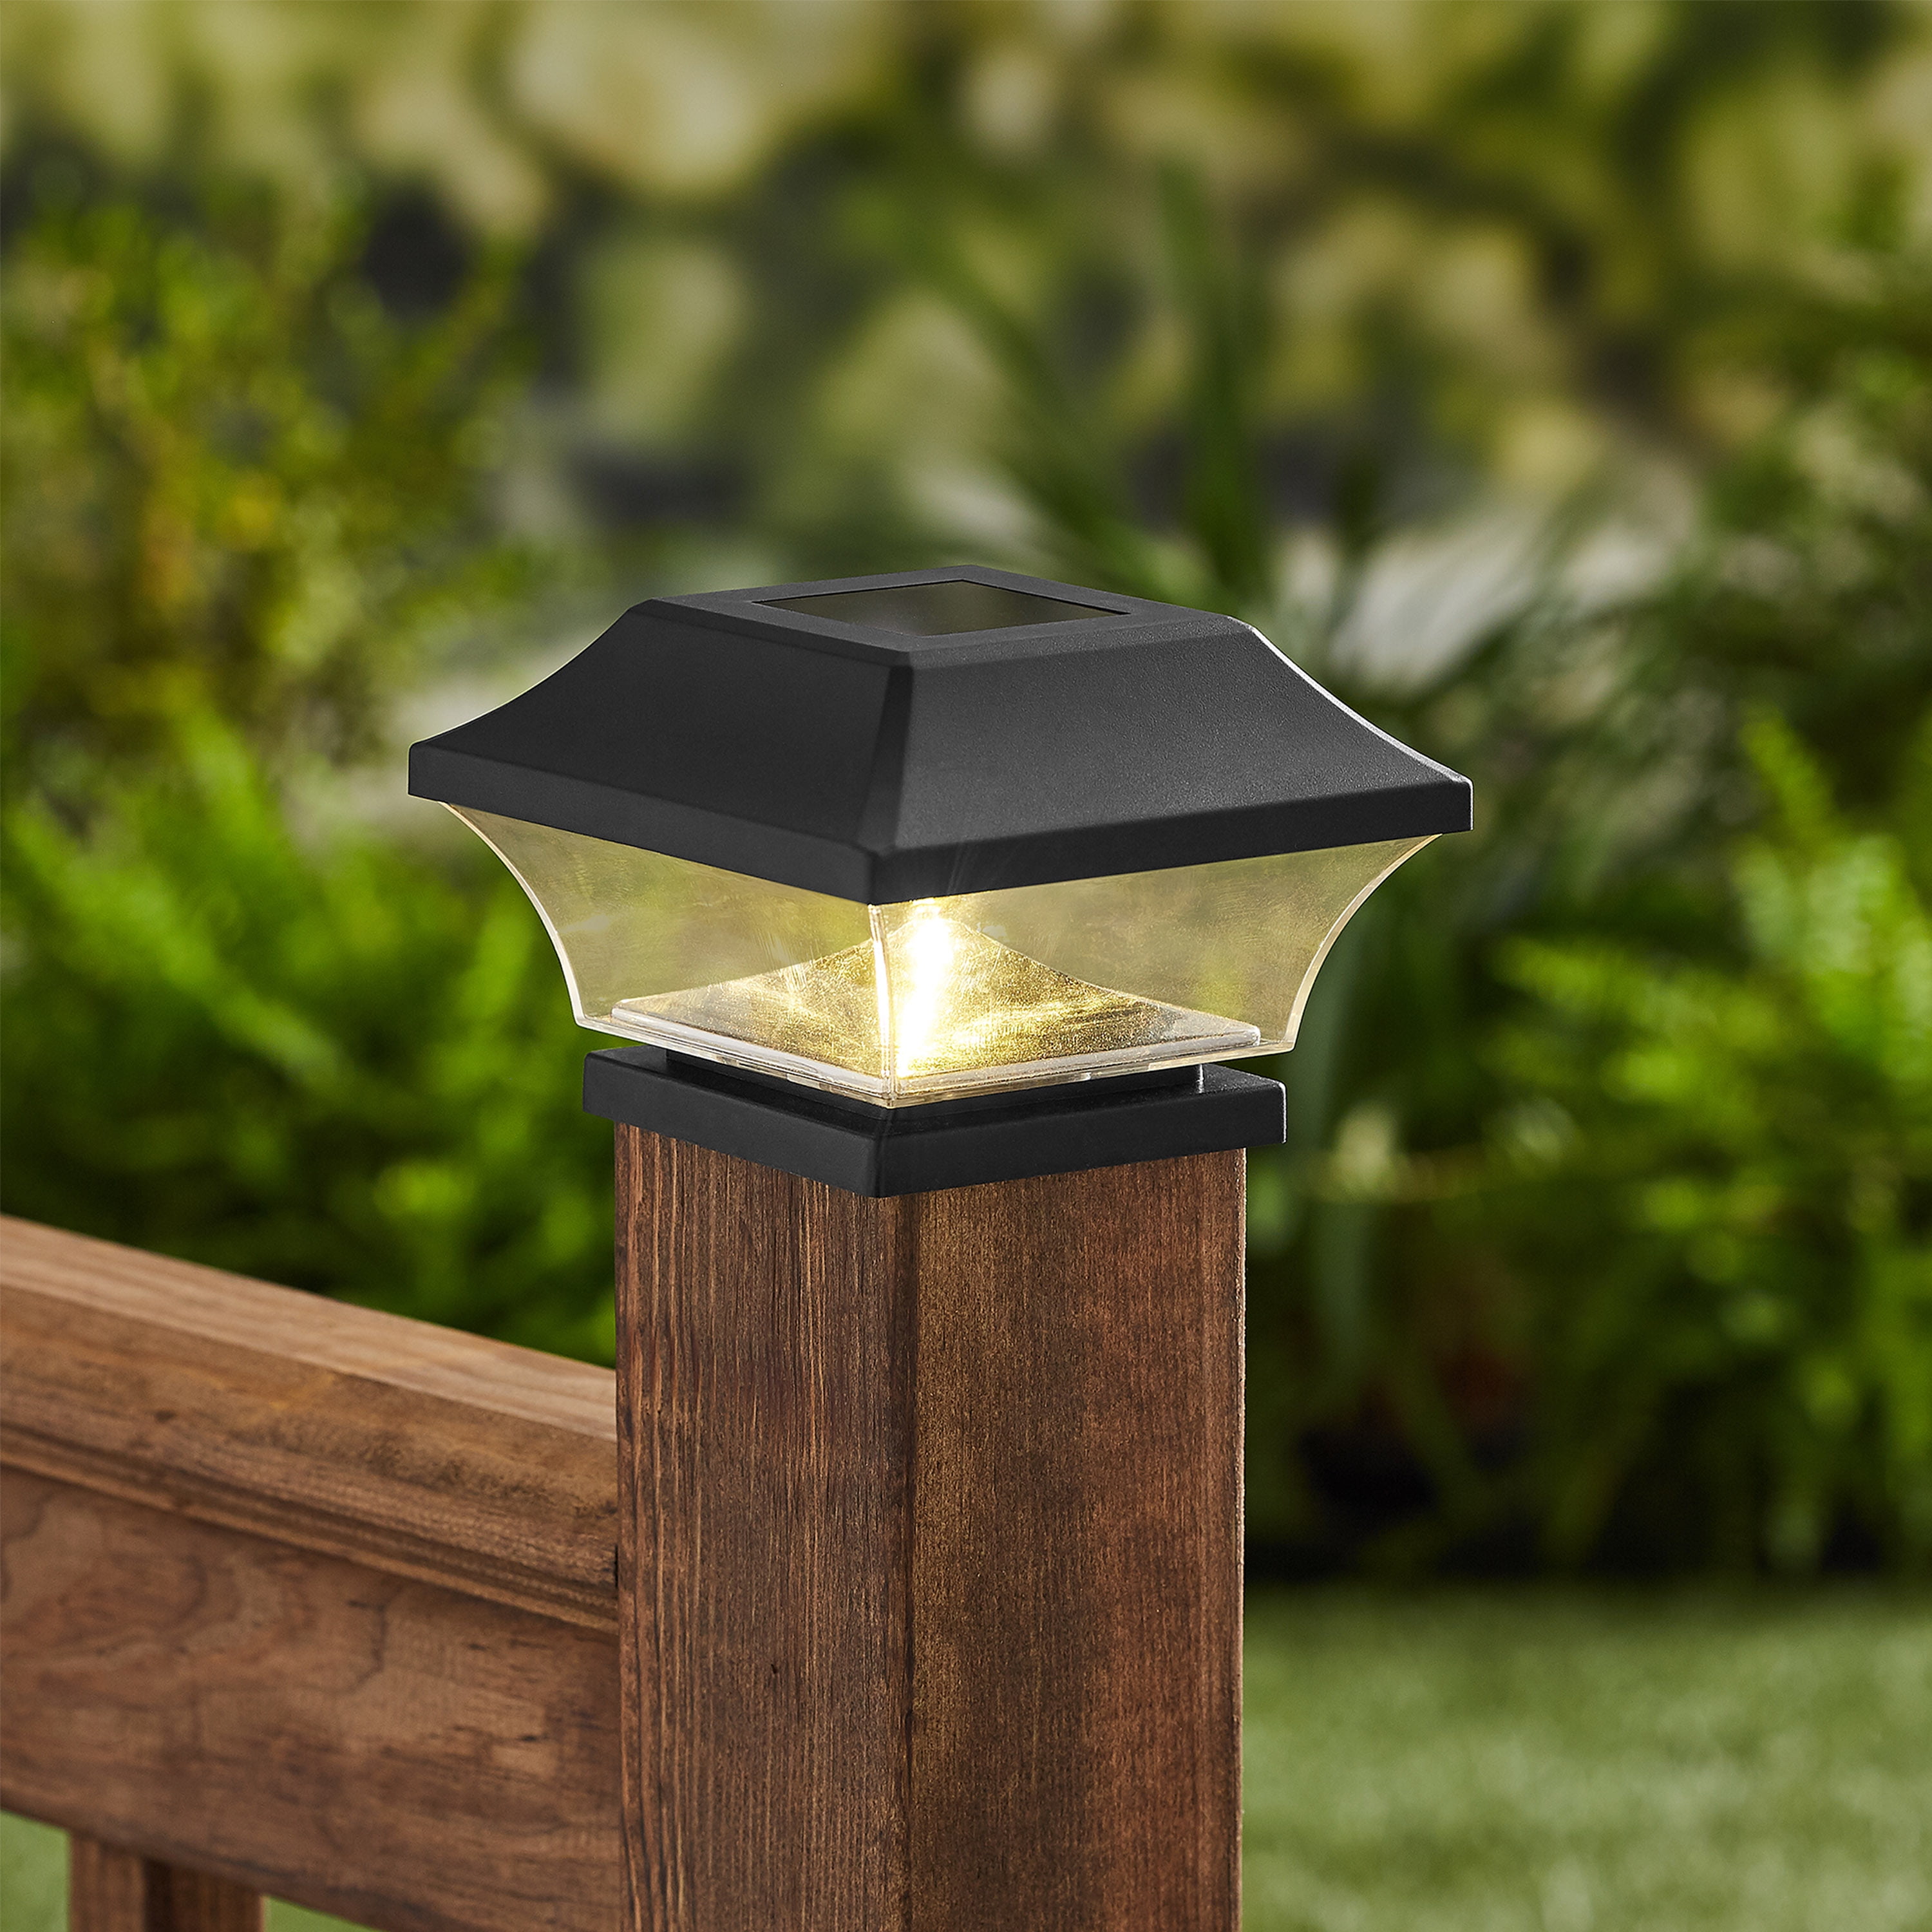 5x5 or 6x6 Wooden Posts Outdoor Post Cap Light for Fence Deck or Patio Lamp Fits 4x4 Solar Powered Caps 4 Pack MAGGIFT 15 Lumen Solar Post Lights Warm White High Brightness SMD LED Lighting 